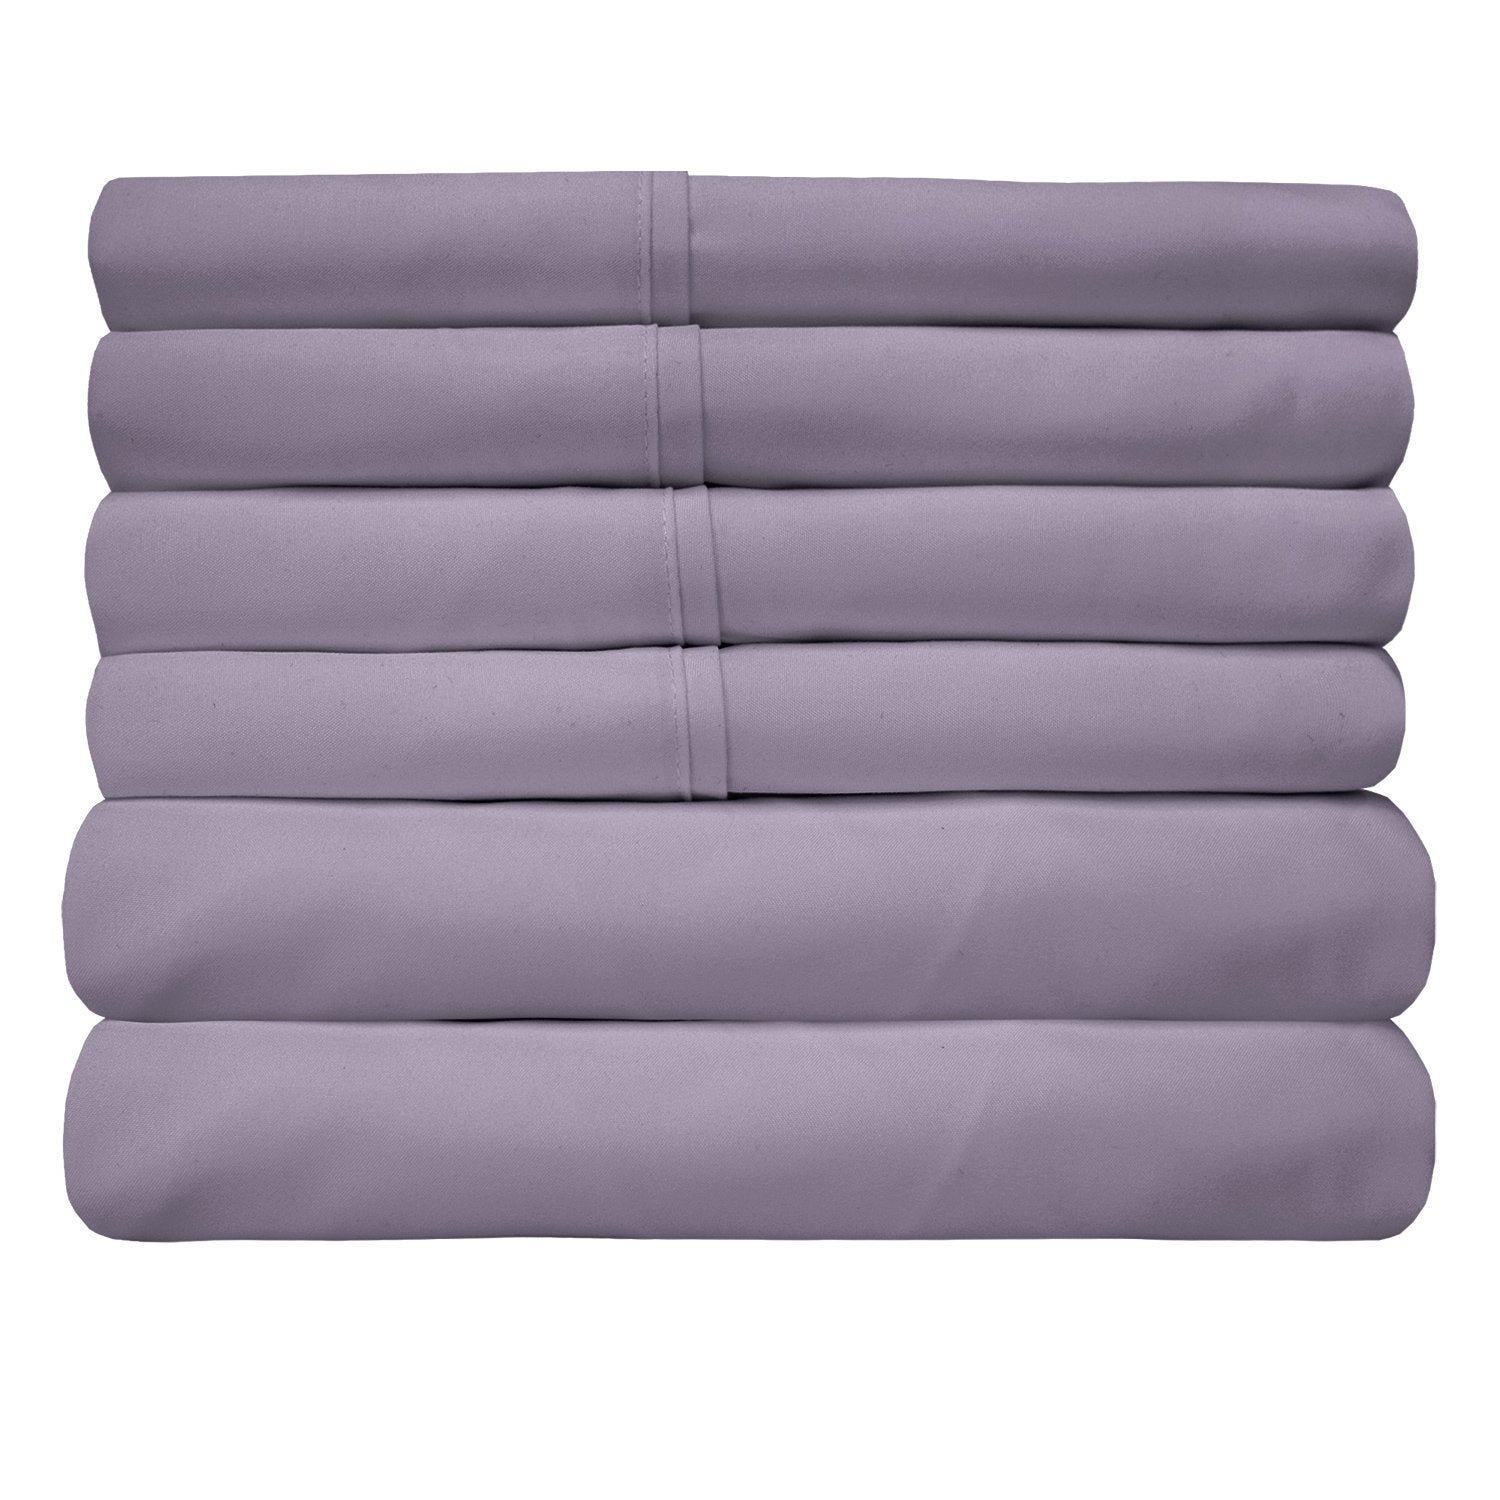 Deluxe 6-Piece Bed Sheet Set (Plum) - Folded 2